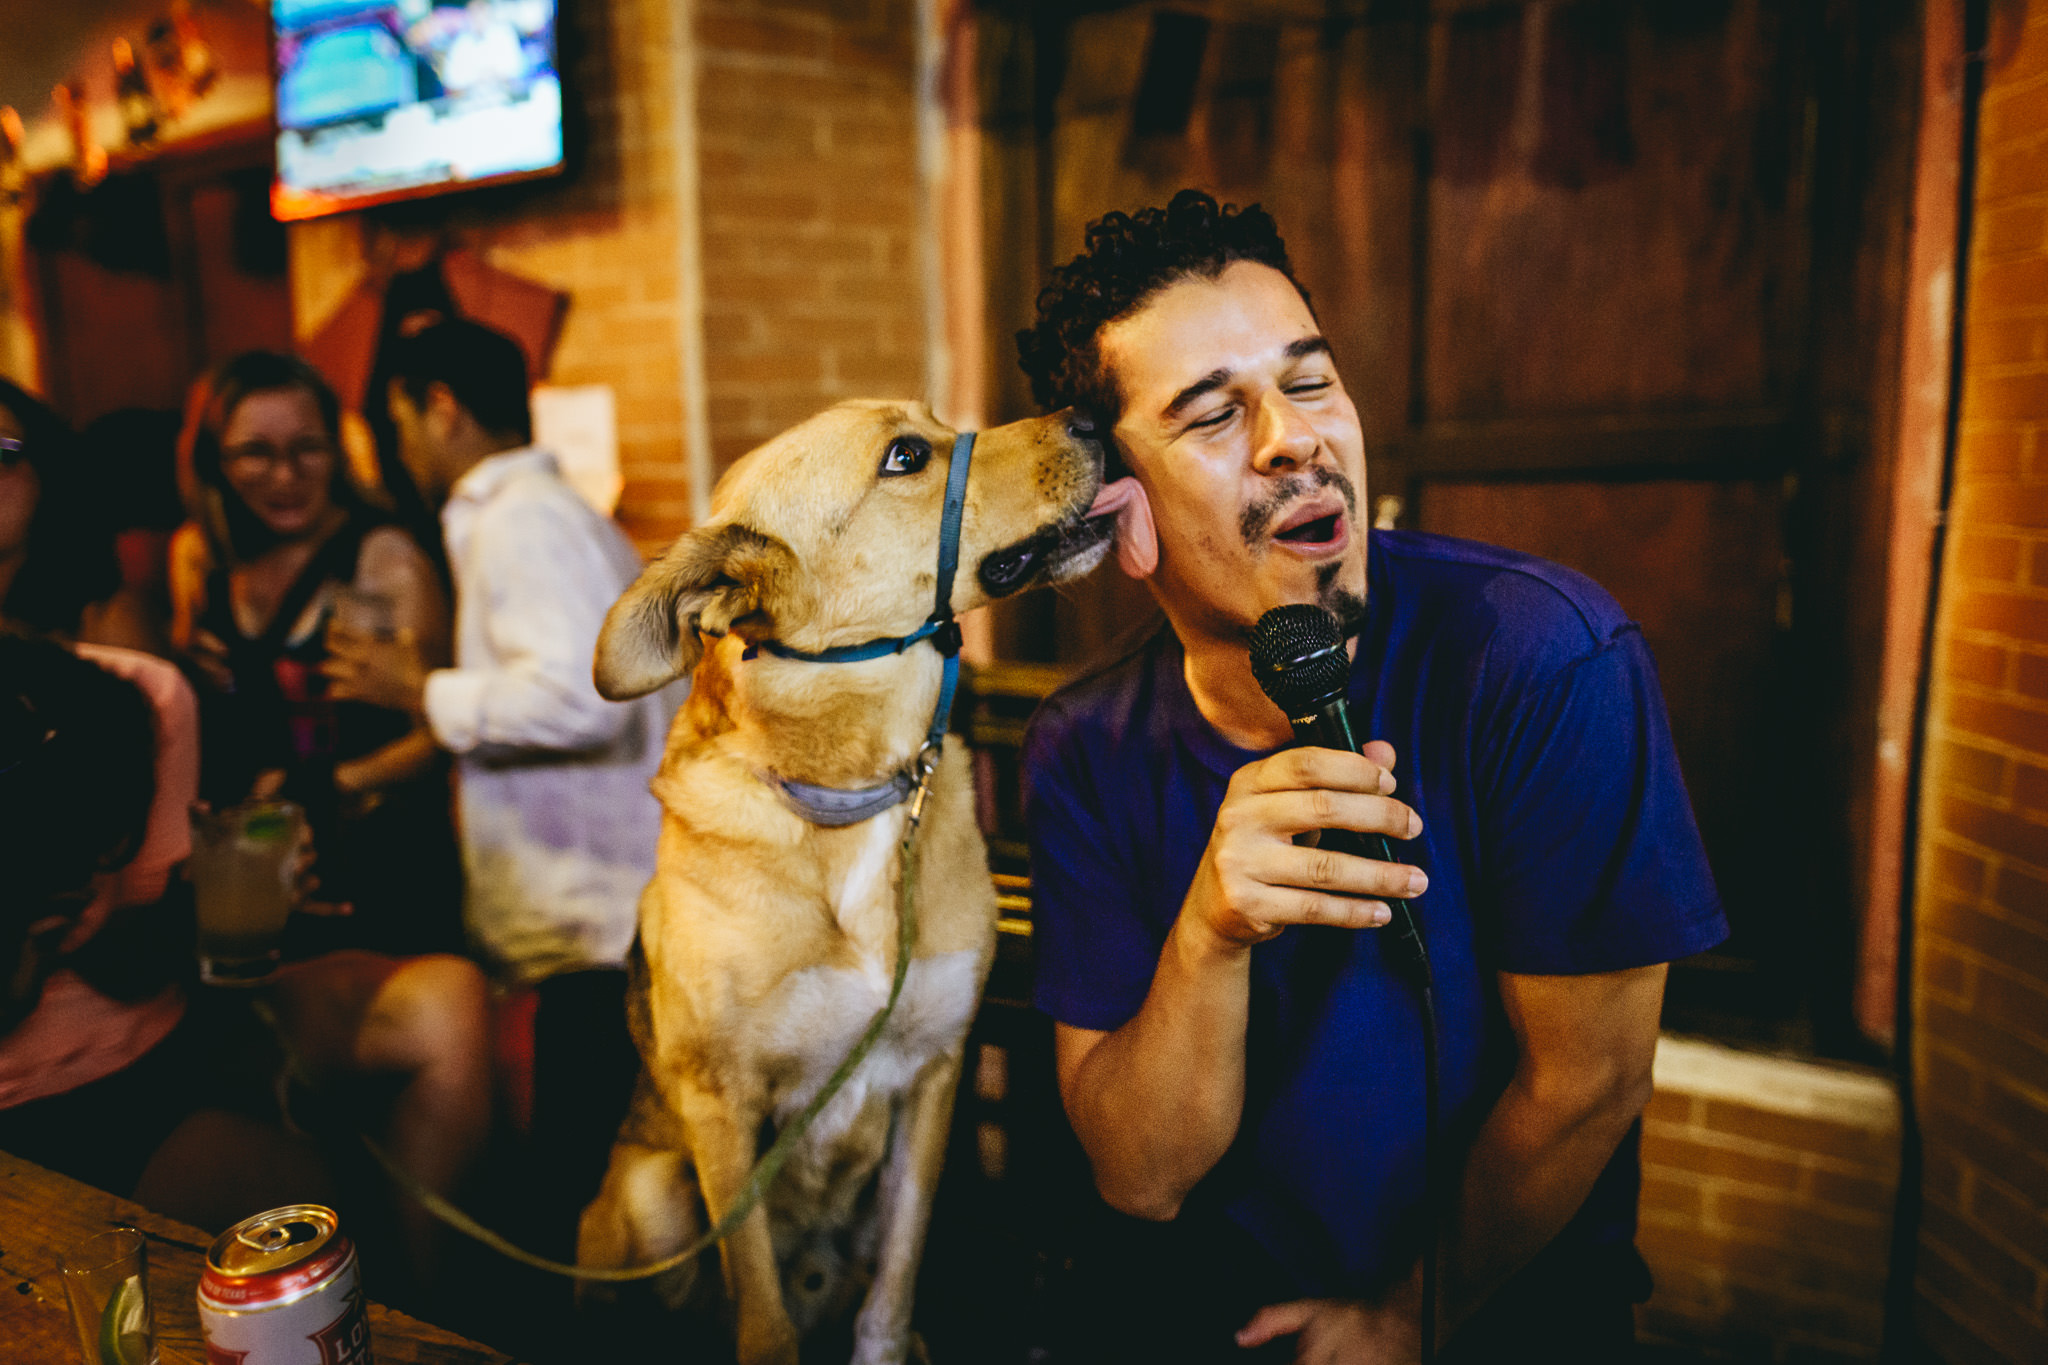 Tender moment between dog and his owner as the friendly dog licks the face of a singer during karaoke night | Bullseye Pub | Antigua Guatemala